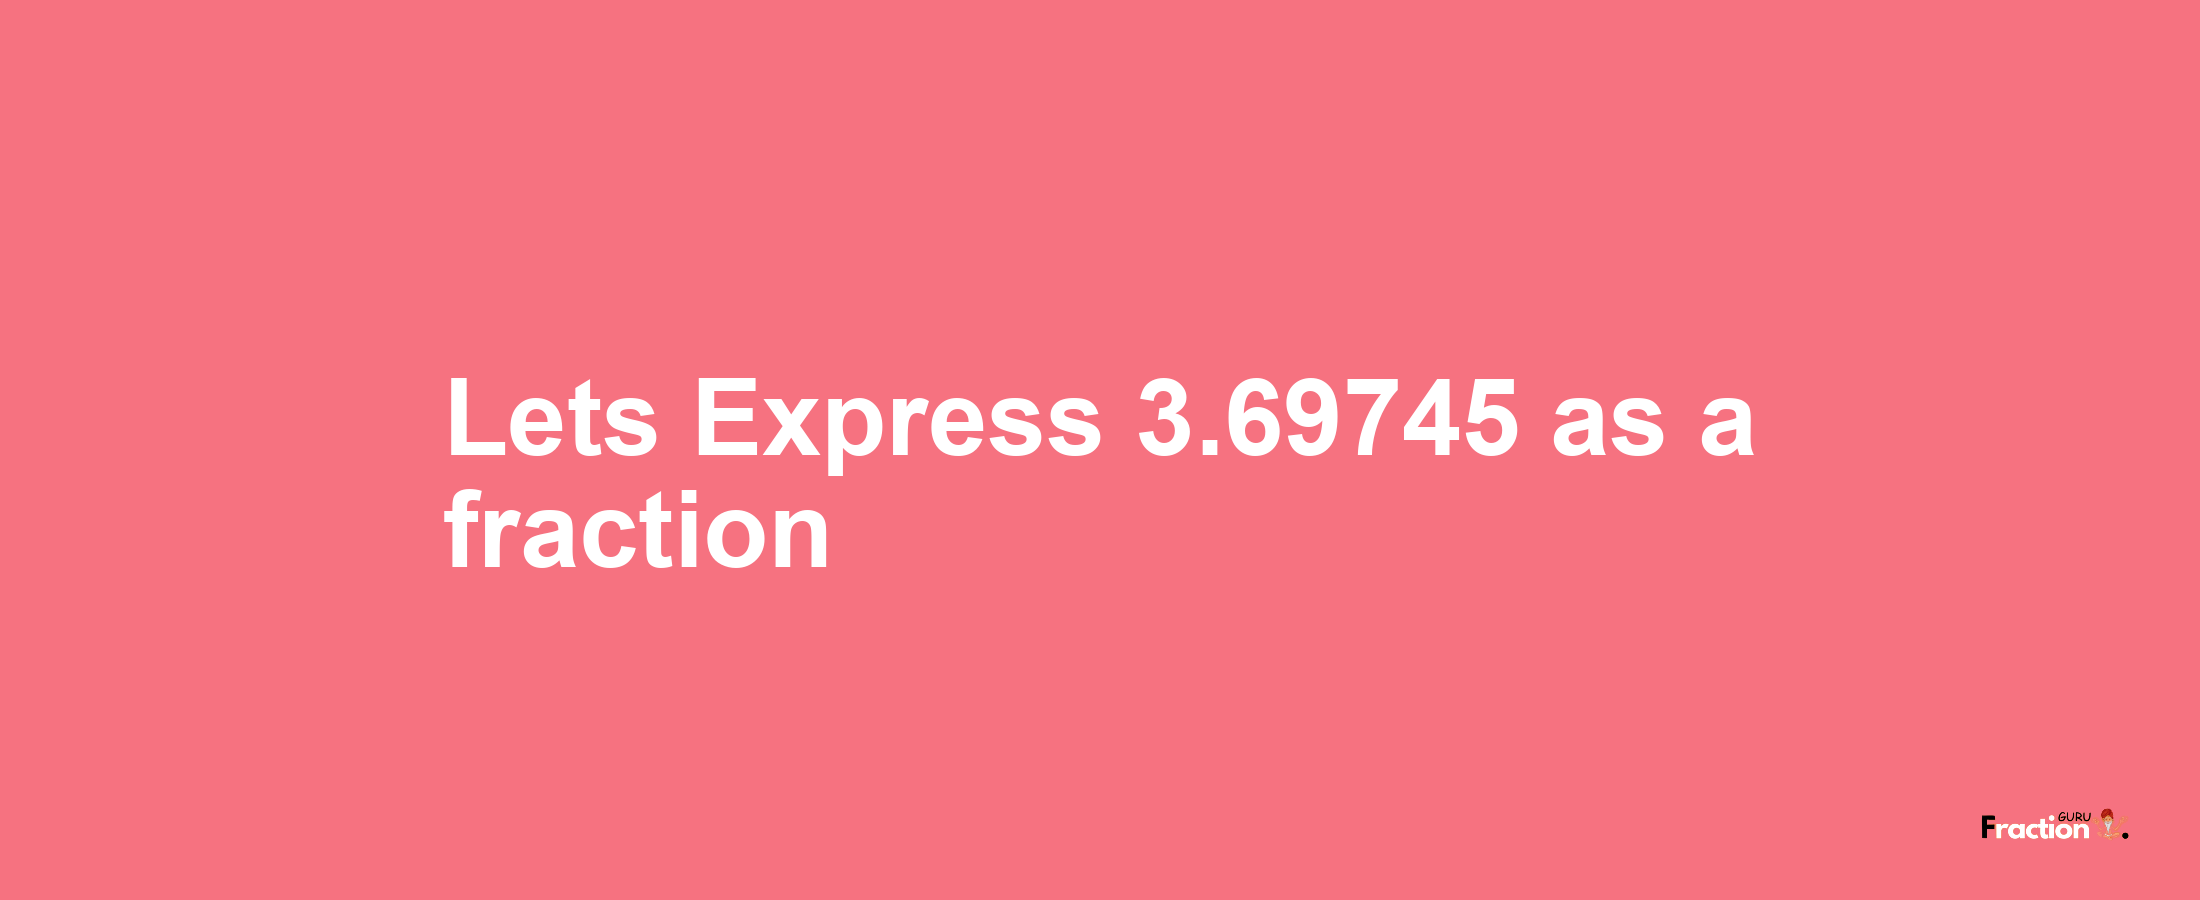 Lets Express 3.69745 as afraction